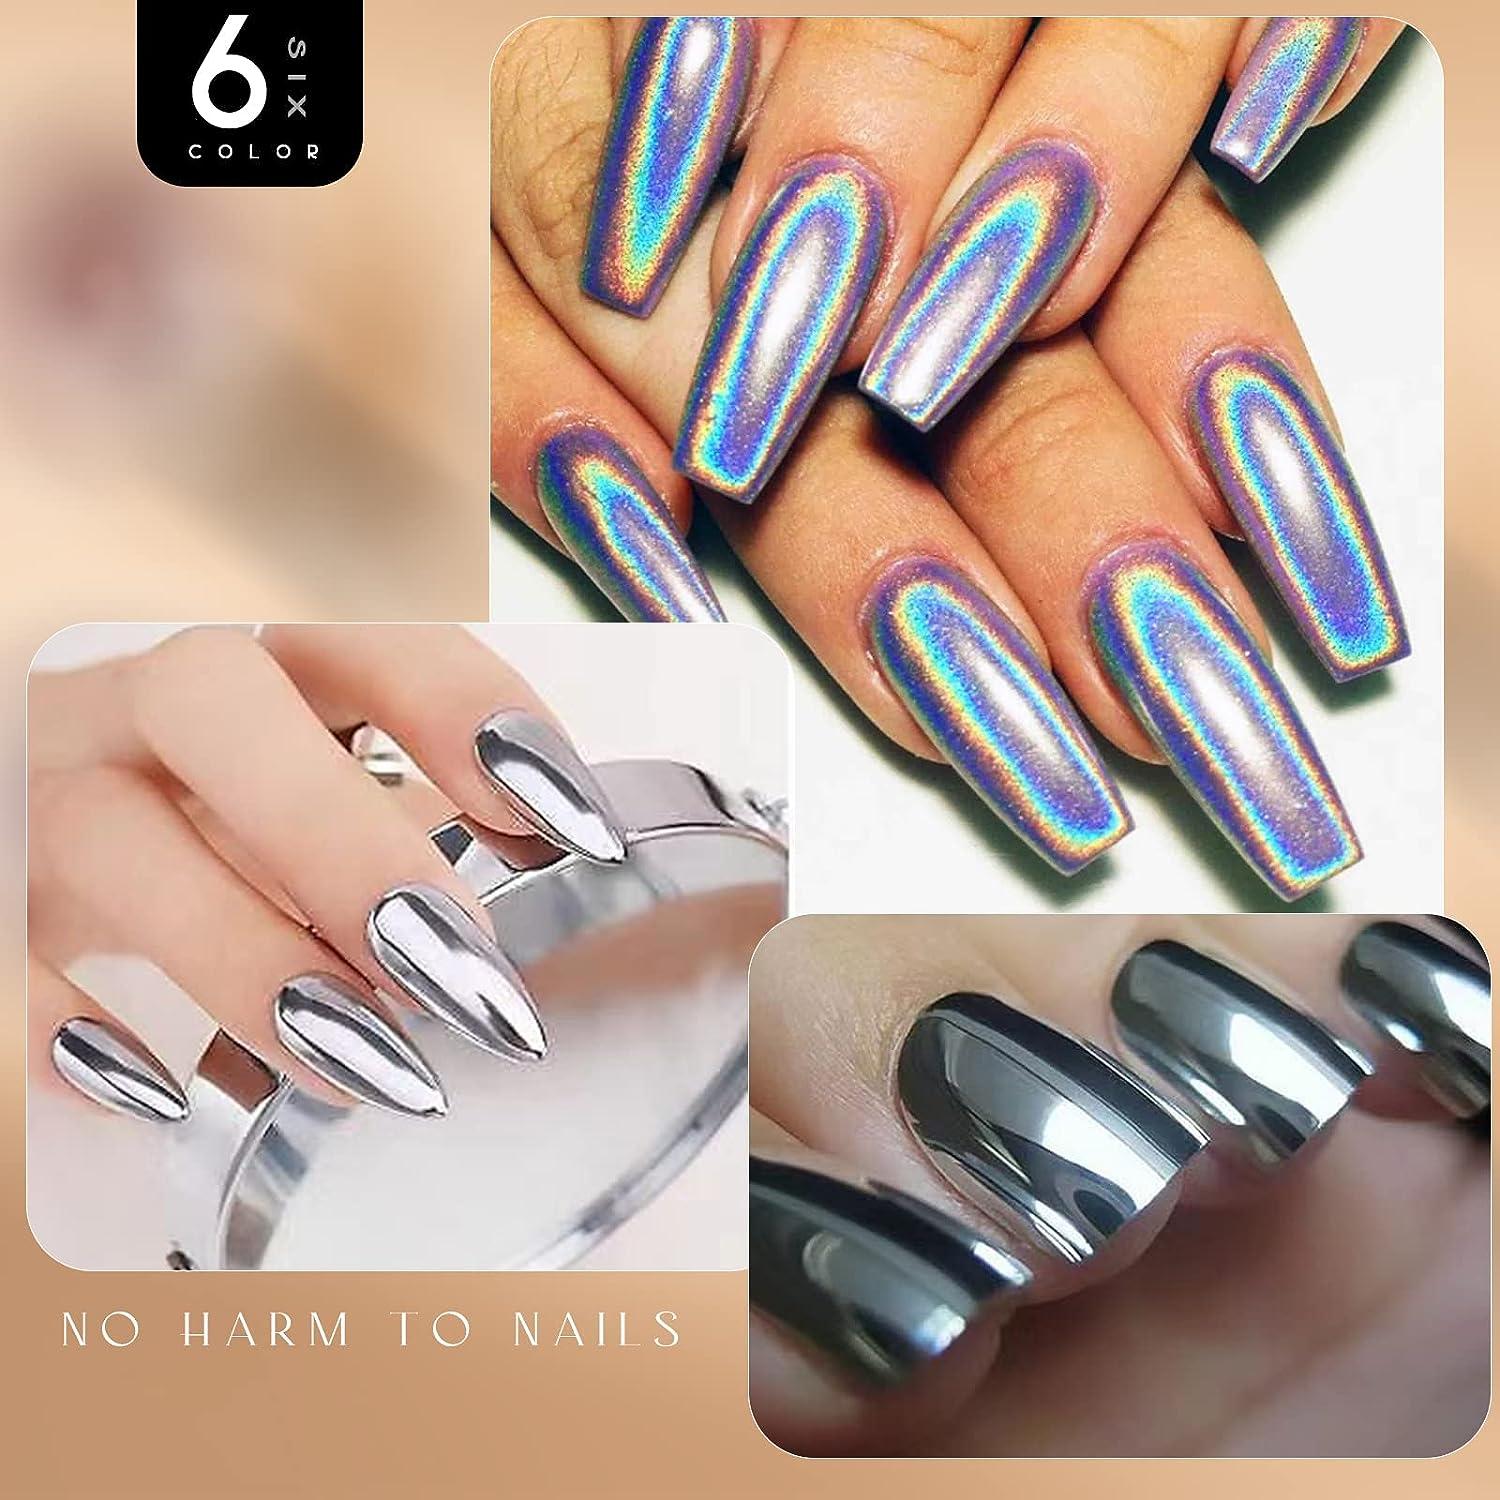 20 Best Chrome Nail Art to Inspire You | Idées vernis à ongles, Vernis à  ongles, Ongles